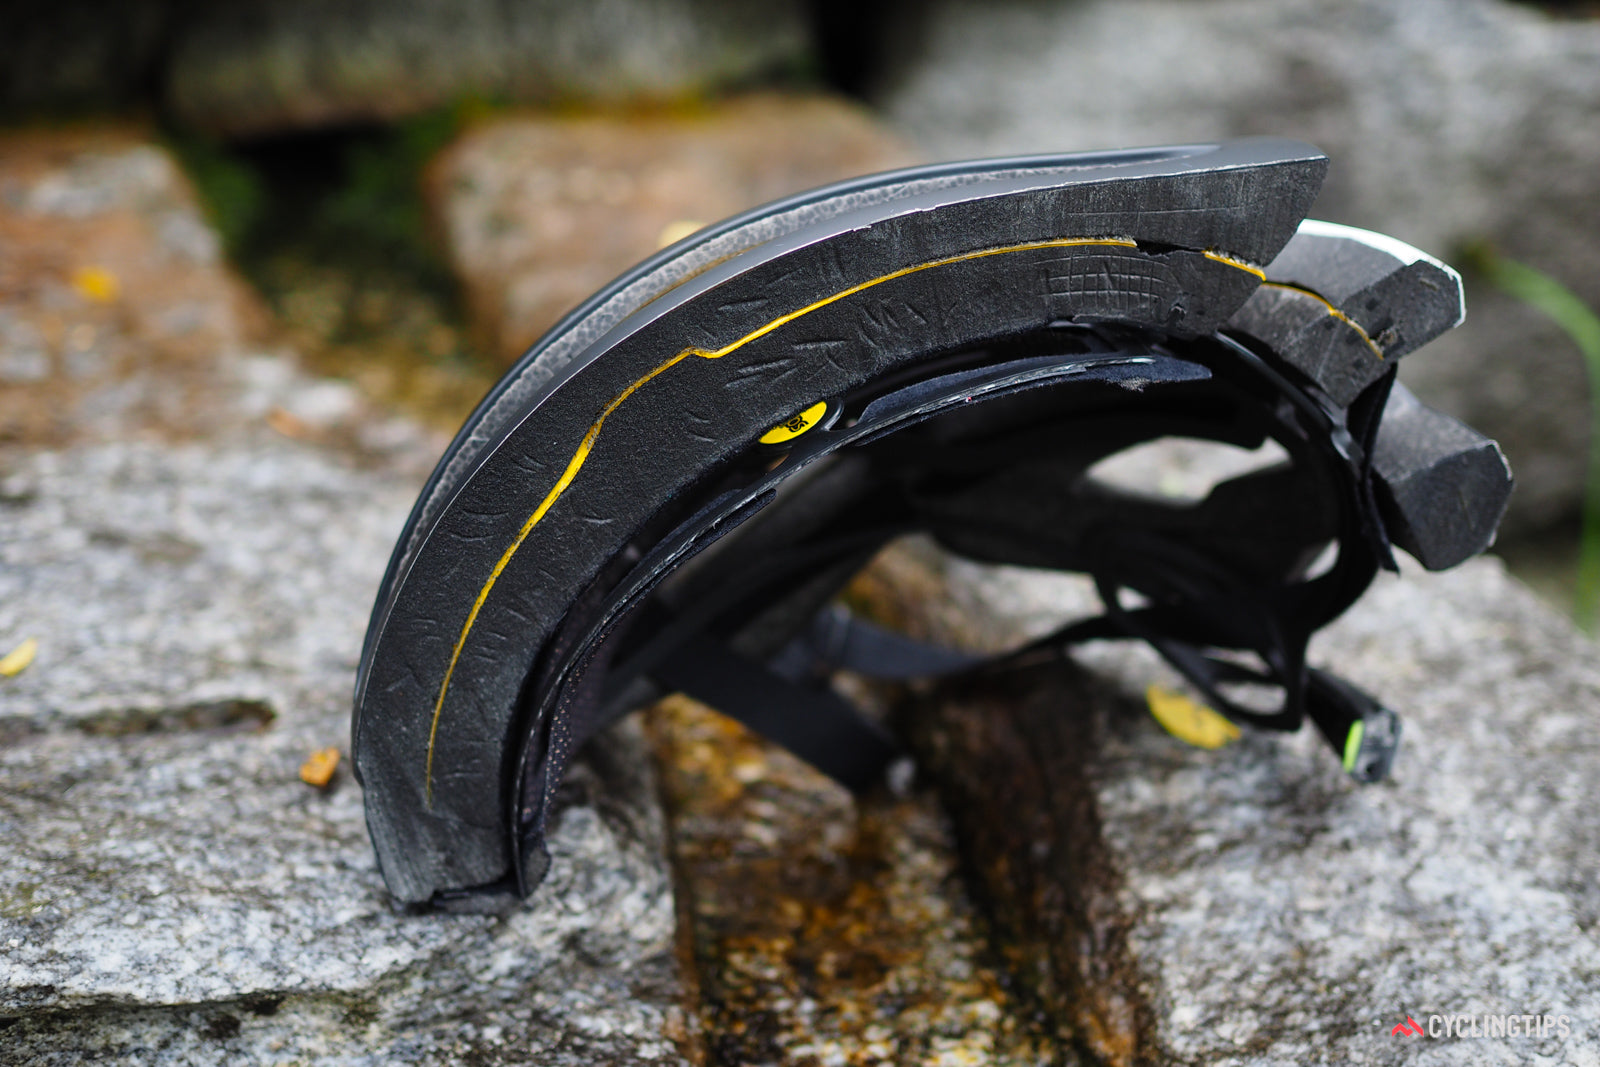 How Bicycle Helmets Work - What Features do You Need?